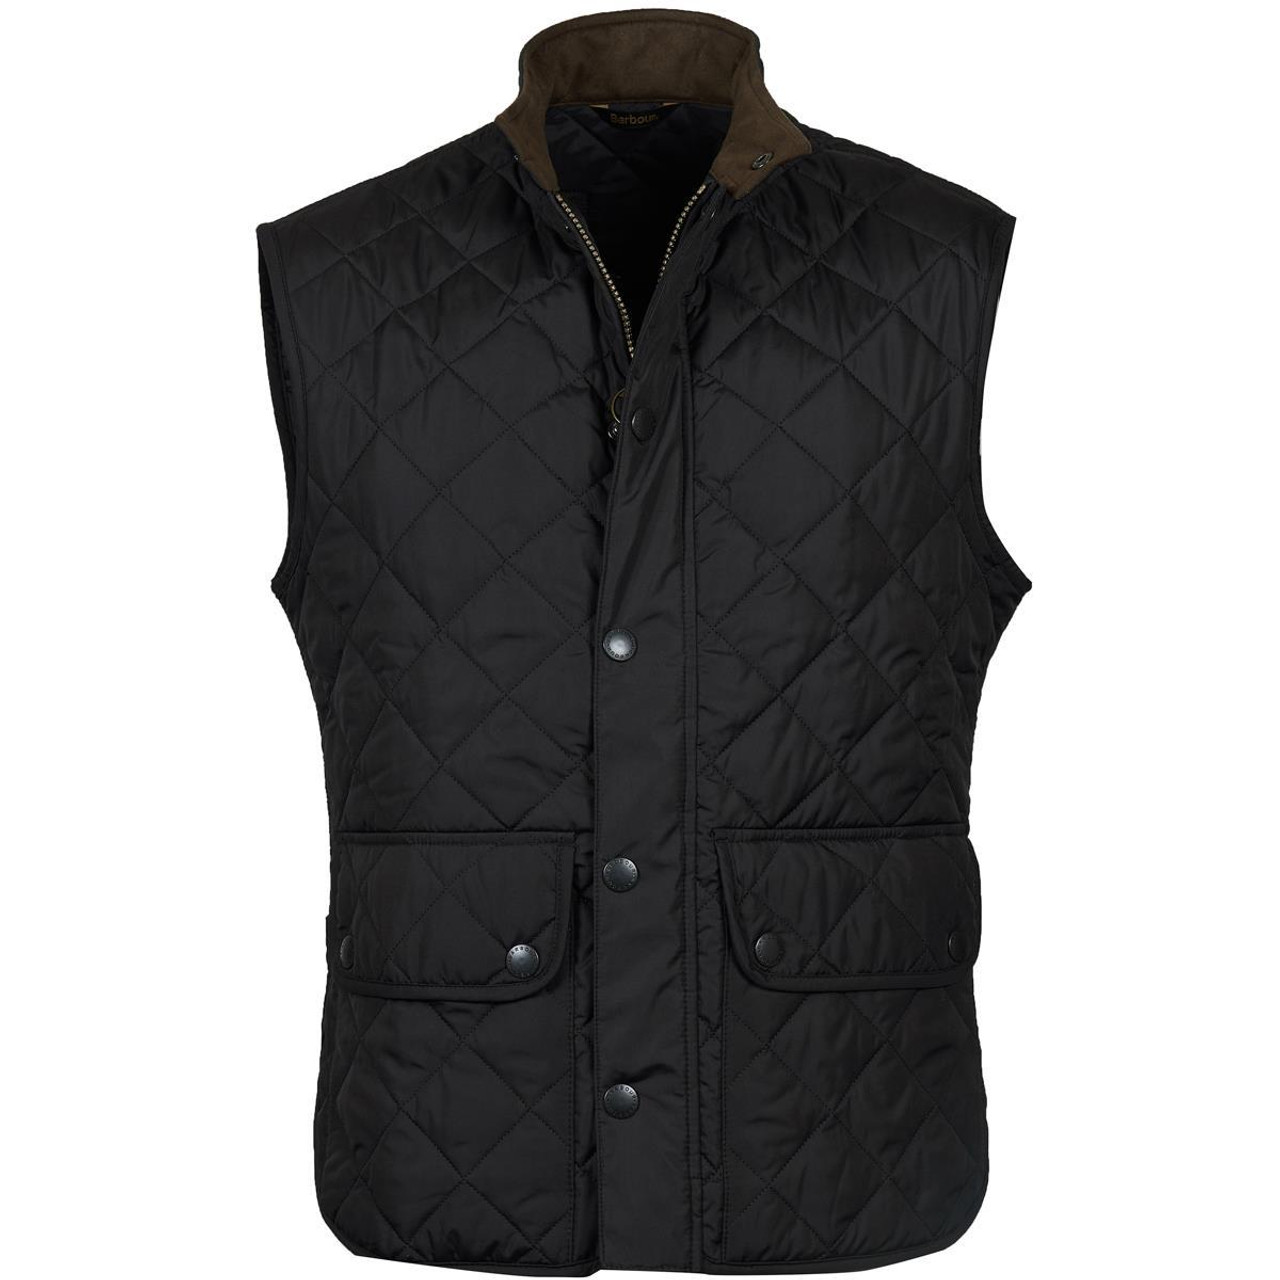 What are the features of the Barbour Lowerdale Gilet?